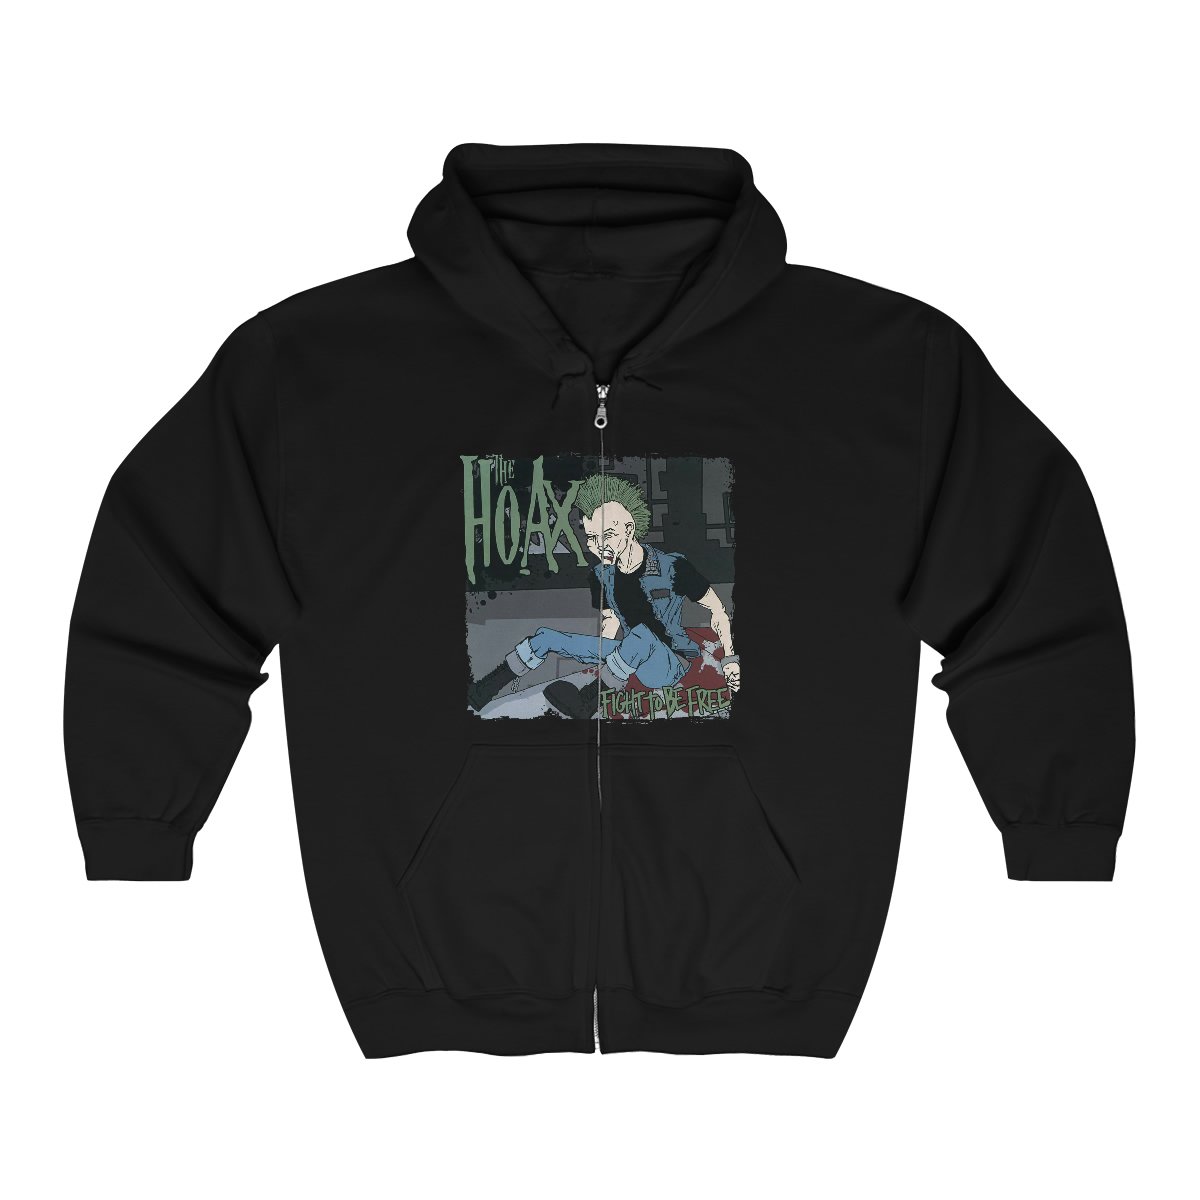 The Hoax – Fight To Be Free (TPR) Full Zip Hooded Sweatshirt